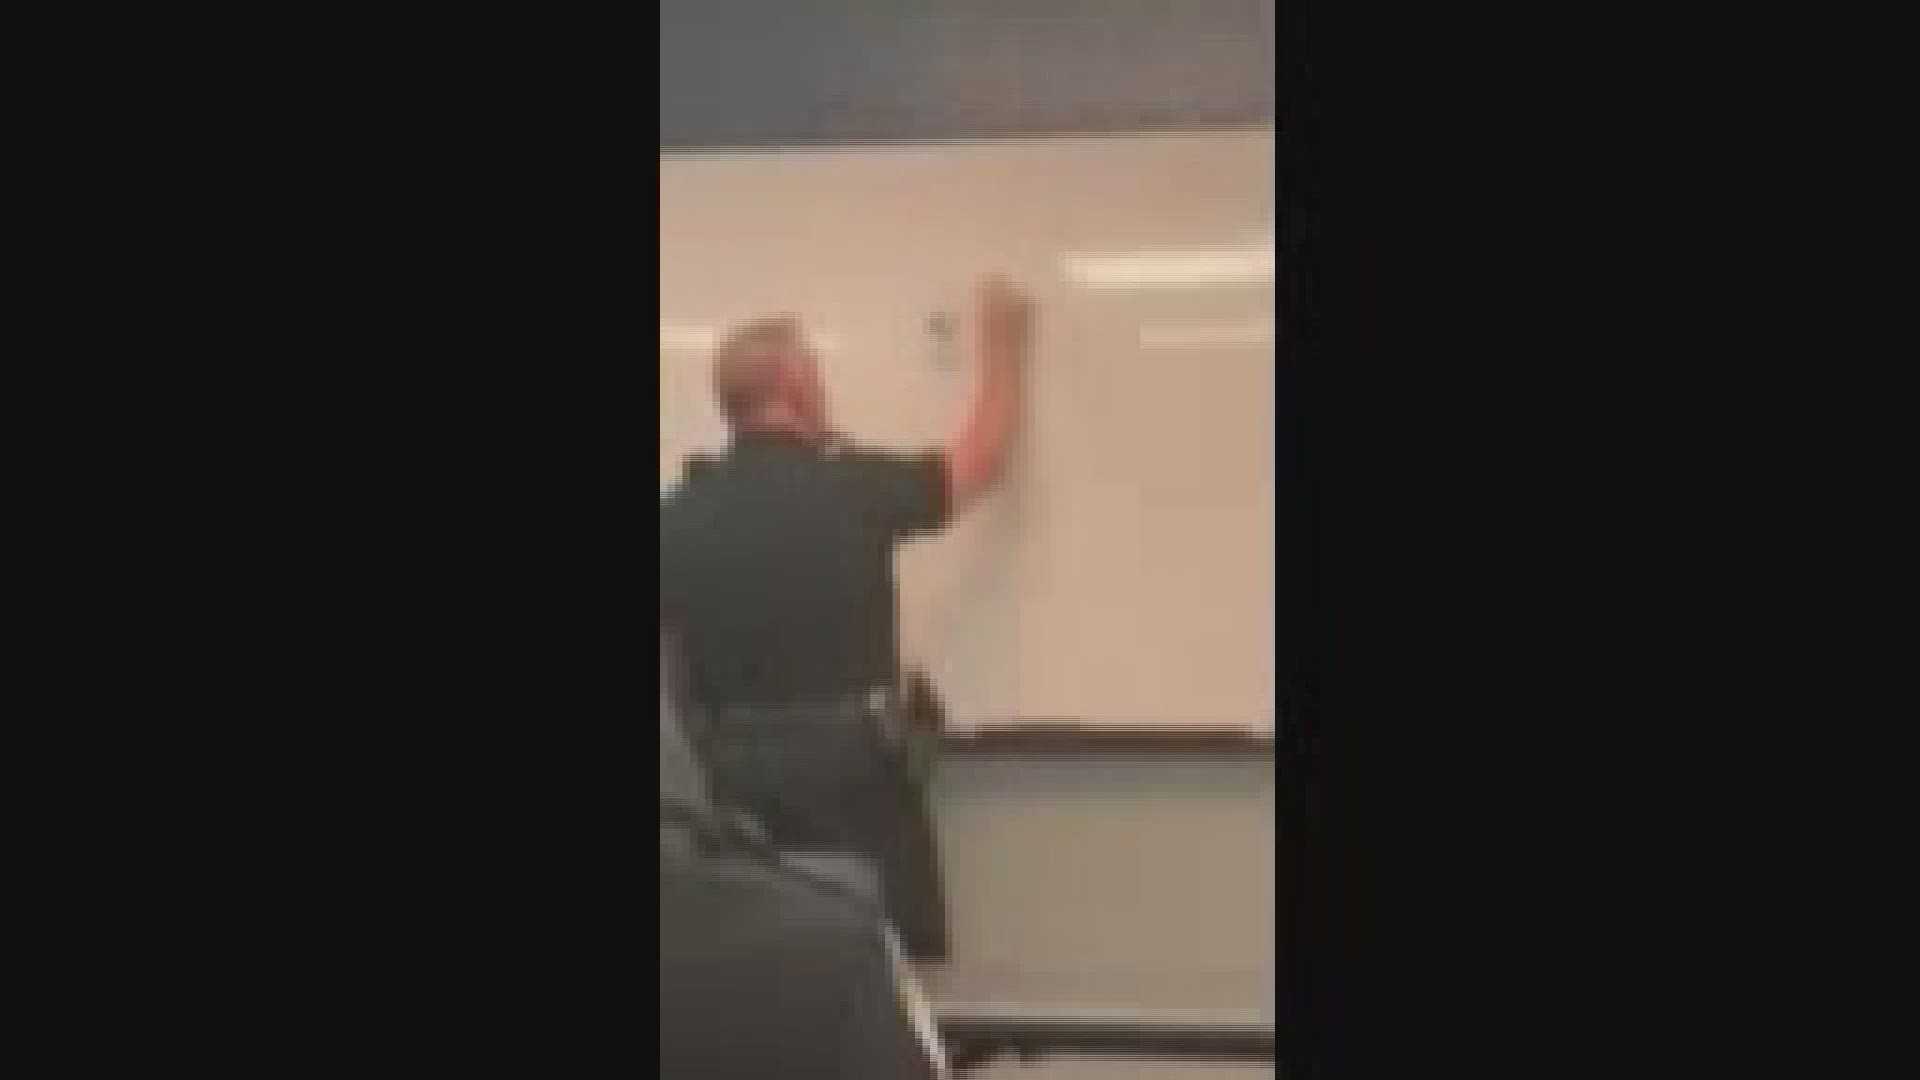 Raw video that's alleged to show Knoxville Police Dept. Sgt. Bobby Maxwell describing in vulgar and offensive terms how a male officer could have oral sex with a female. On the video he could be heard using terms like "choke job" and "pearl necklace". This video is now part of an internal affairs investigation. Warning: offensive language